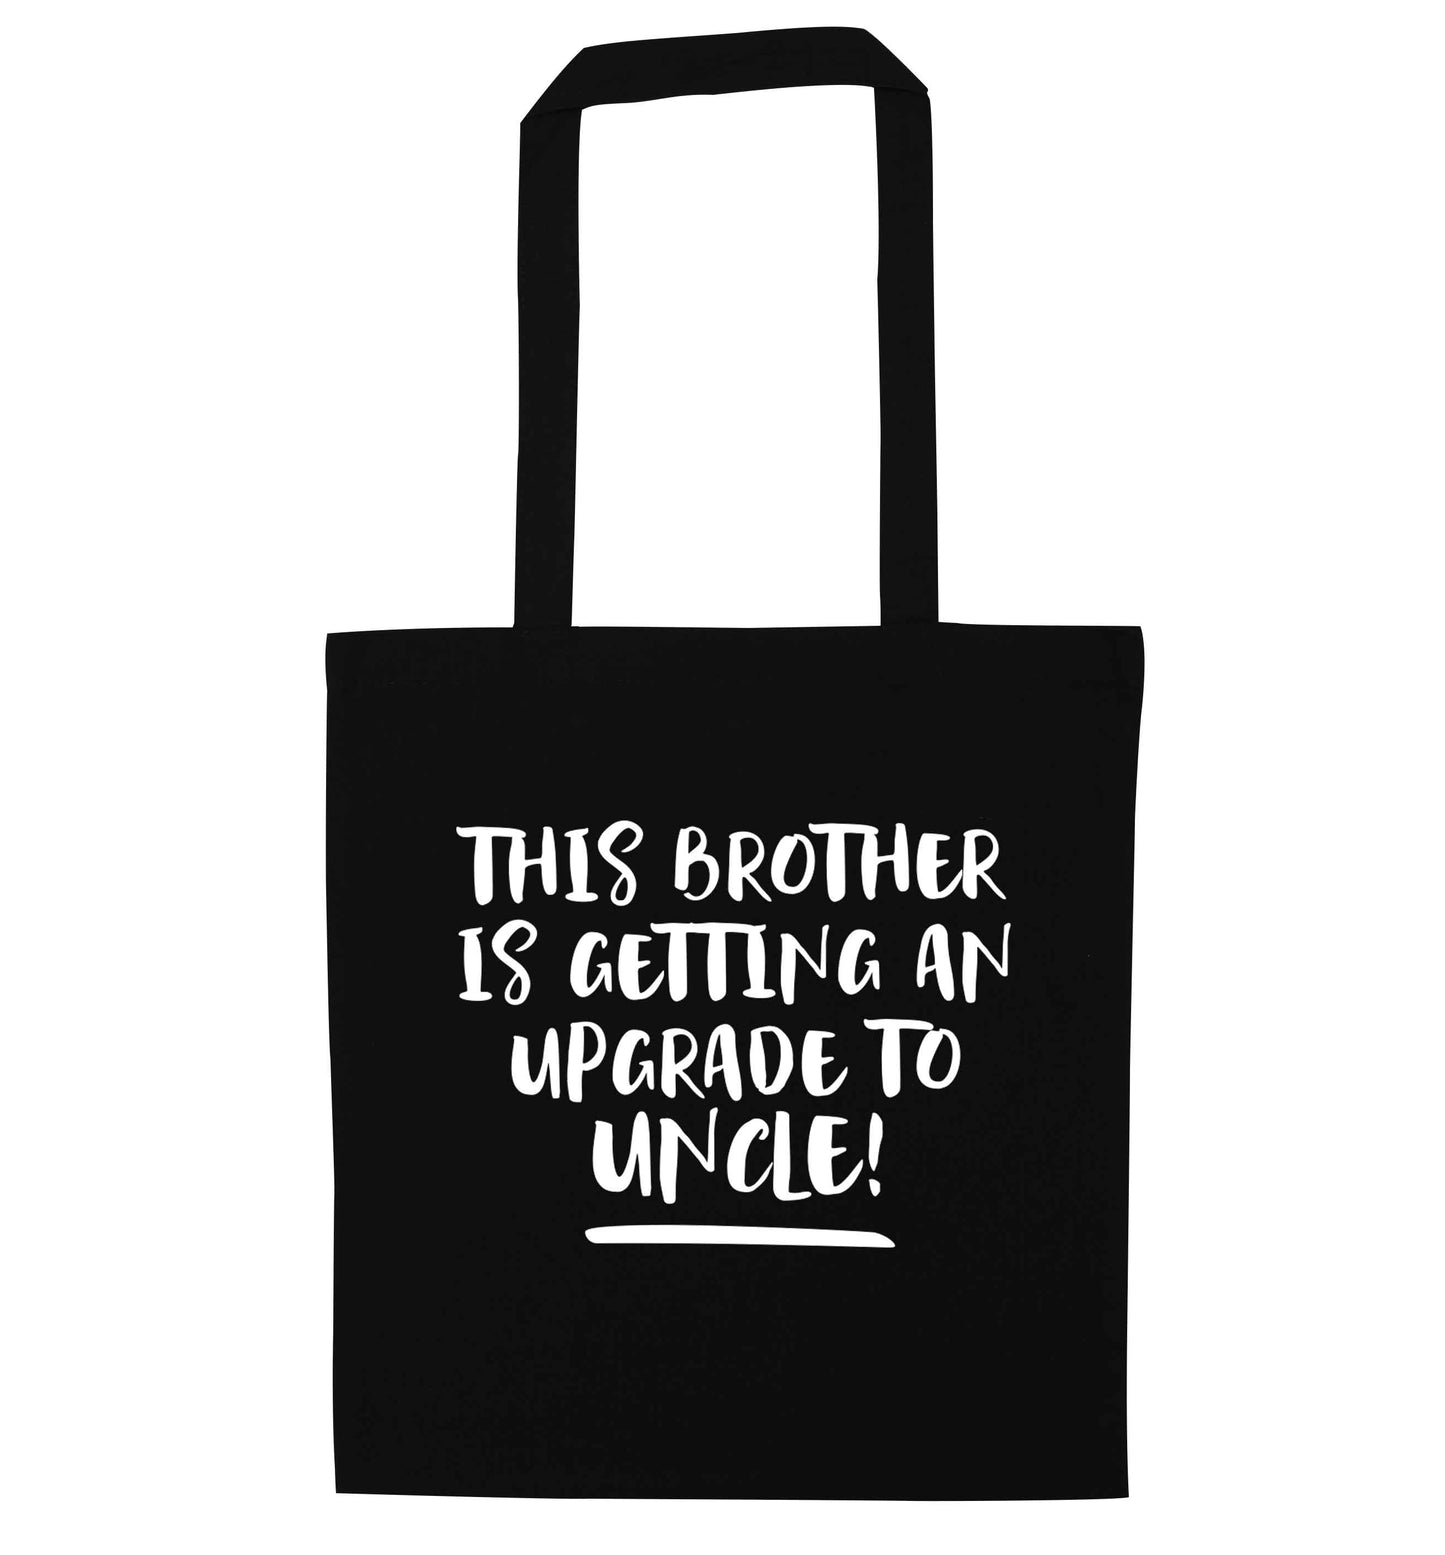 This brother is getting an upgrade to uncle! black tote bag